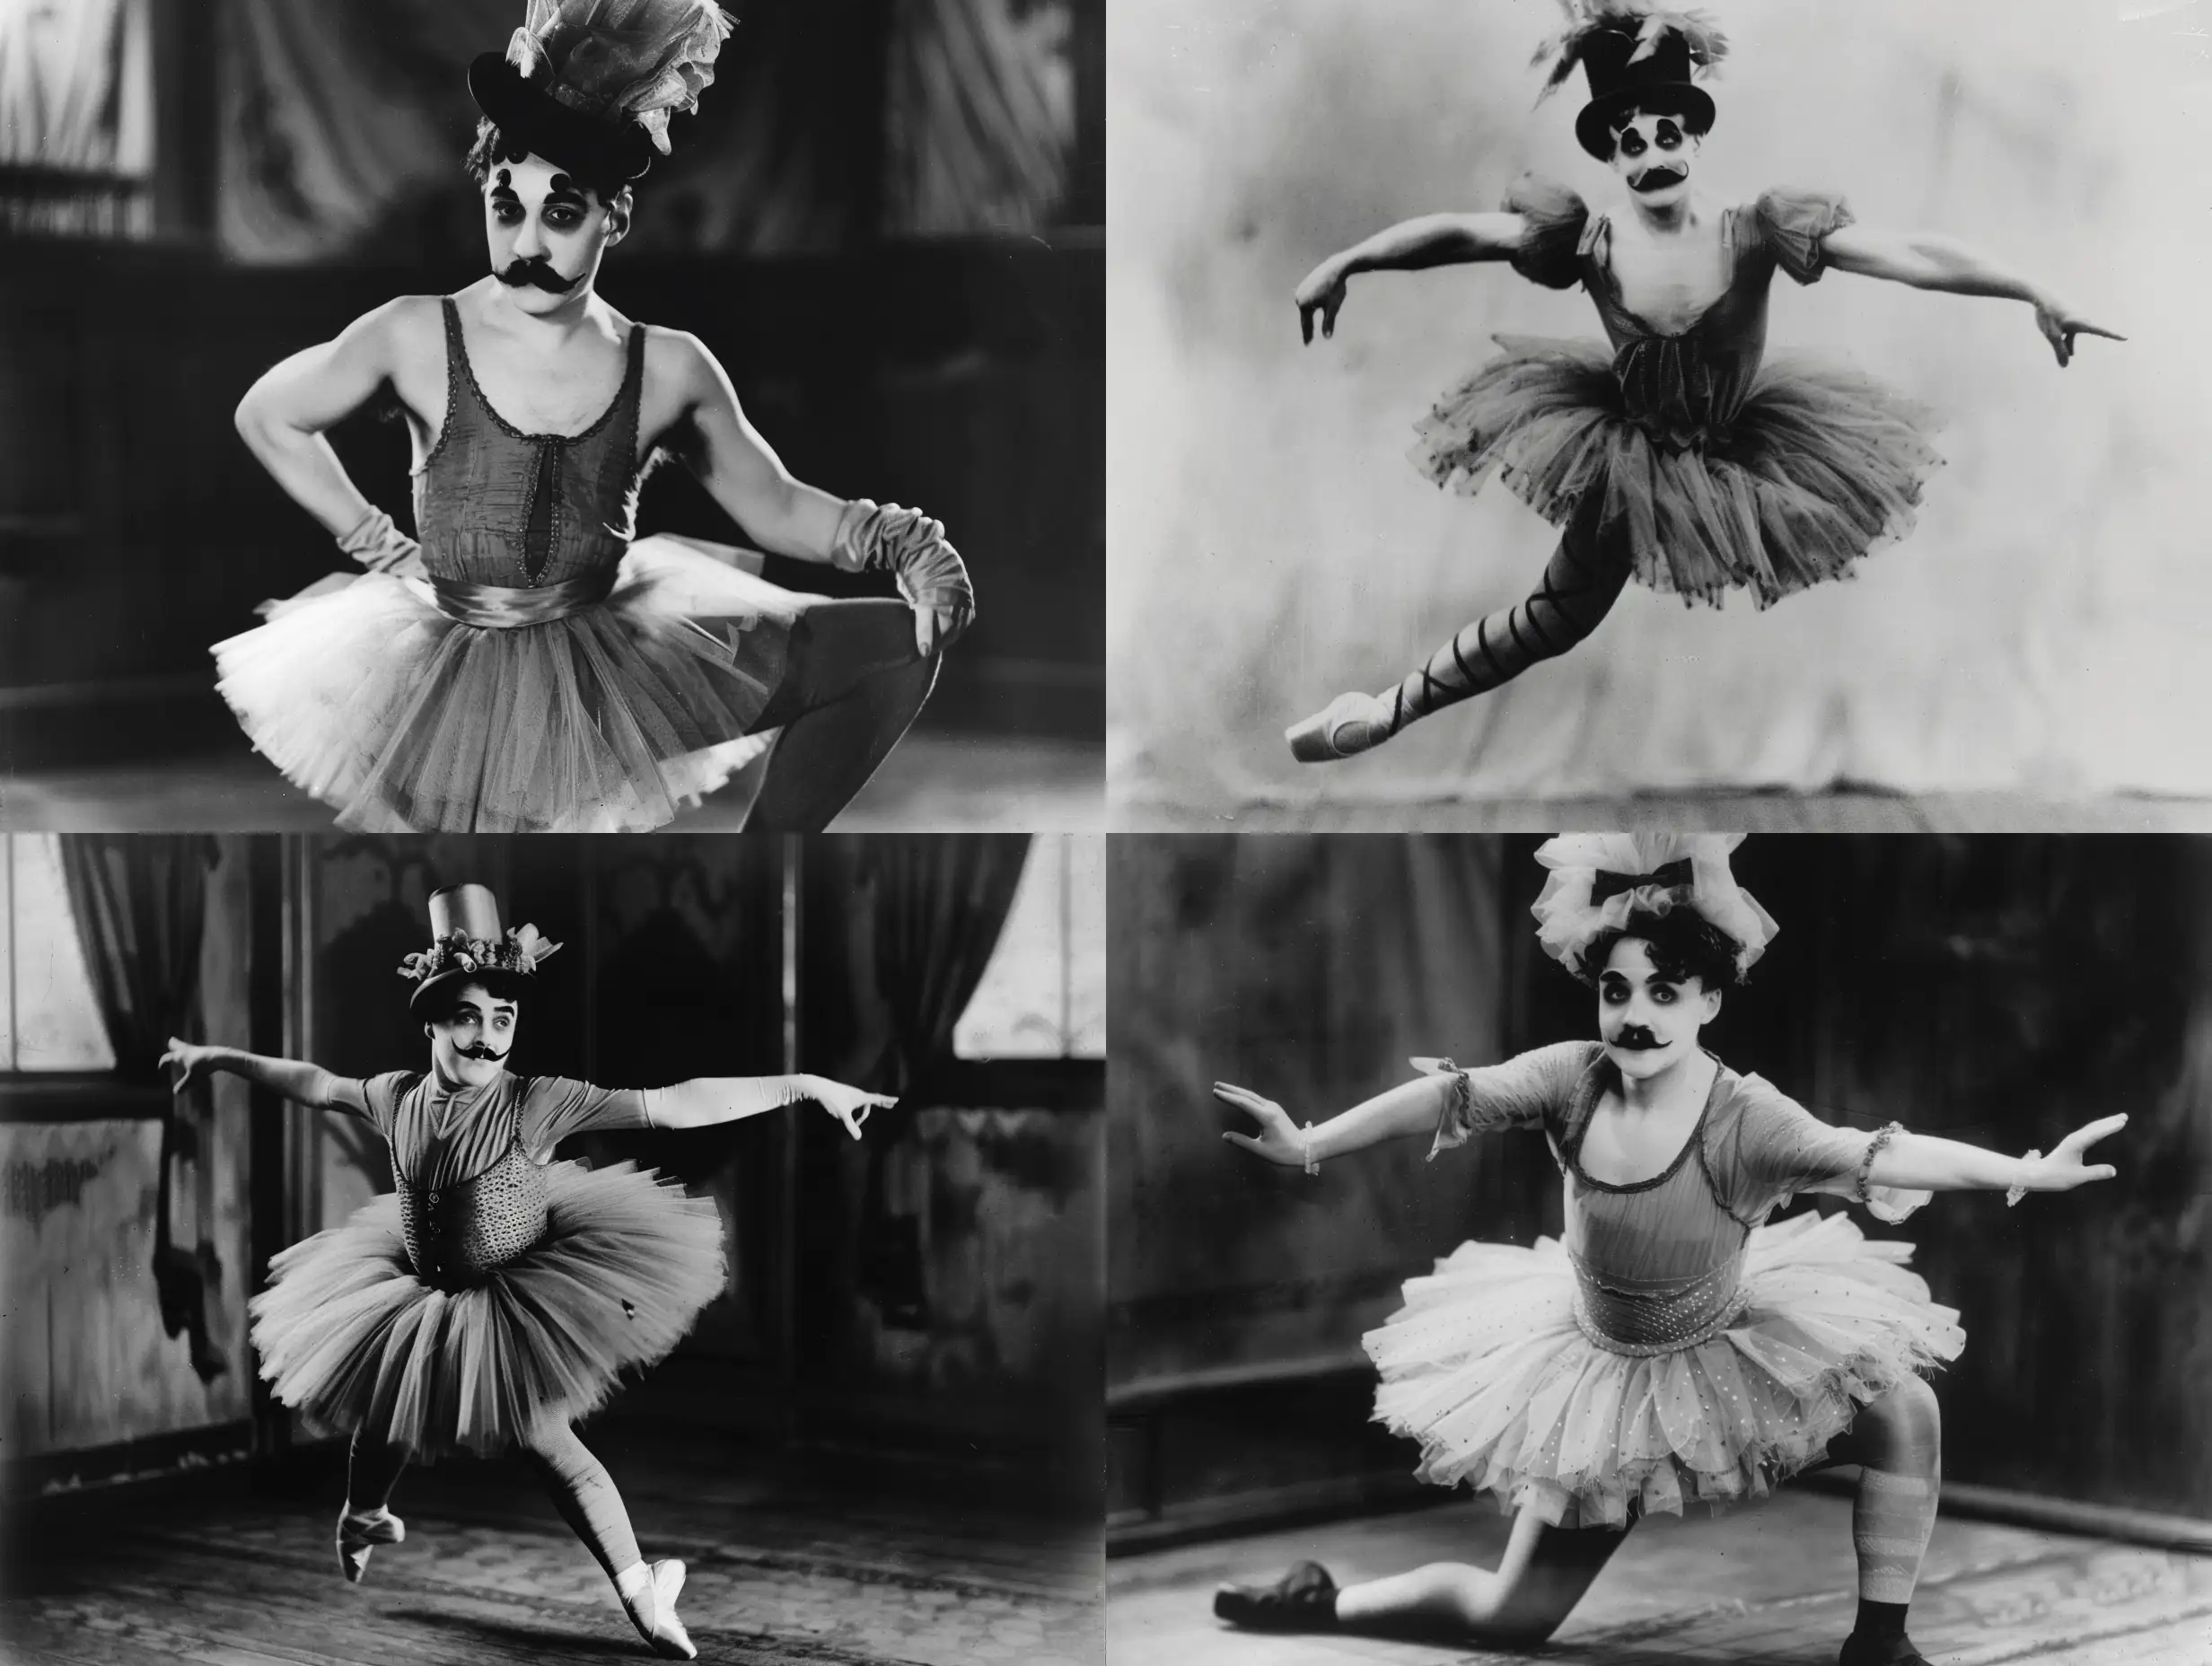 A German Charlie Chaplin dressed in a tutu and doing ballet badly, black and white, 1920s style